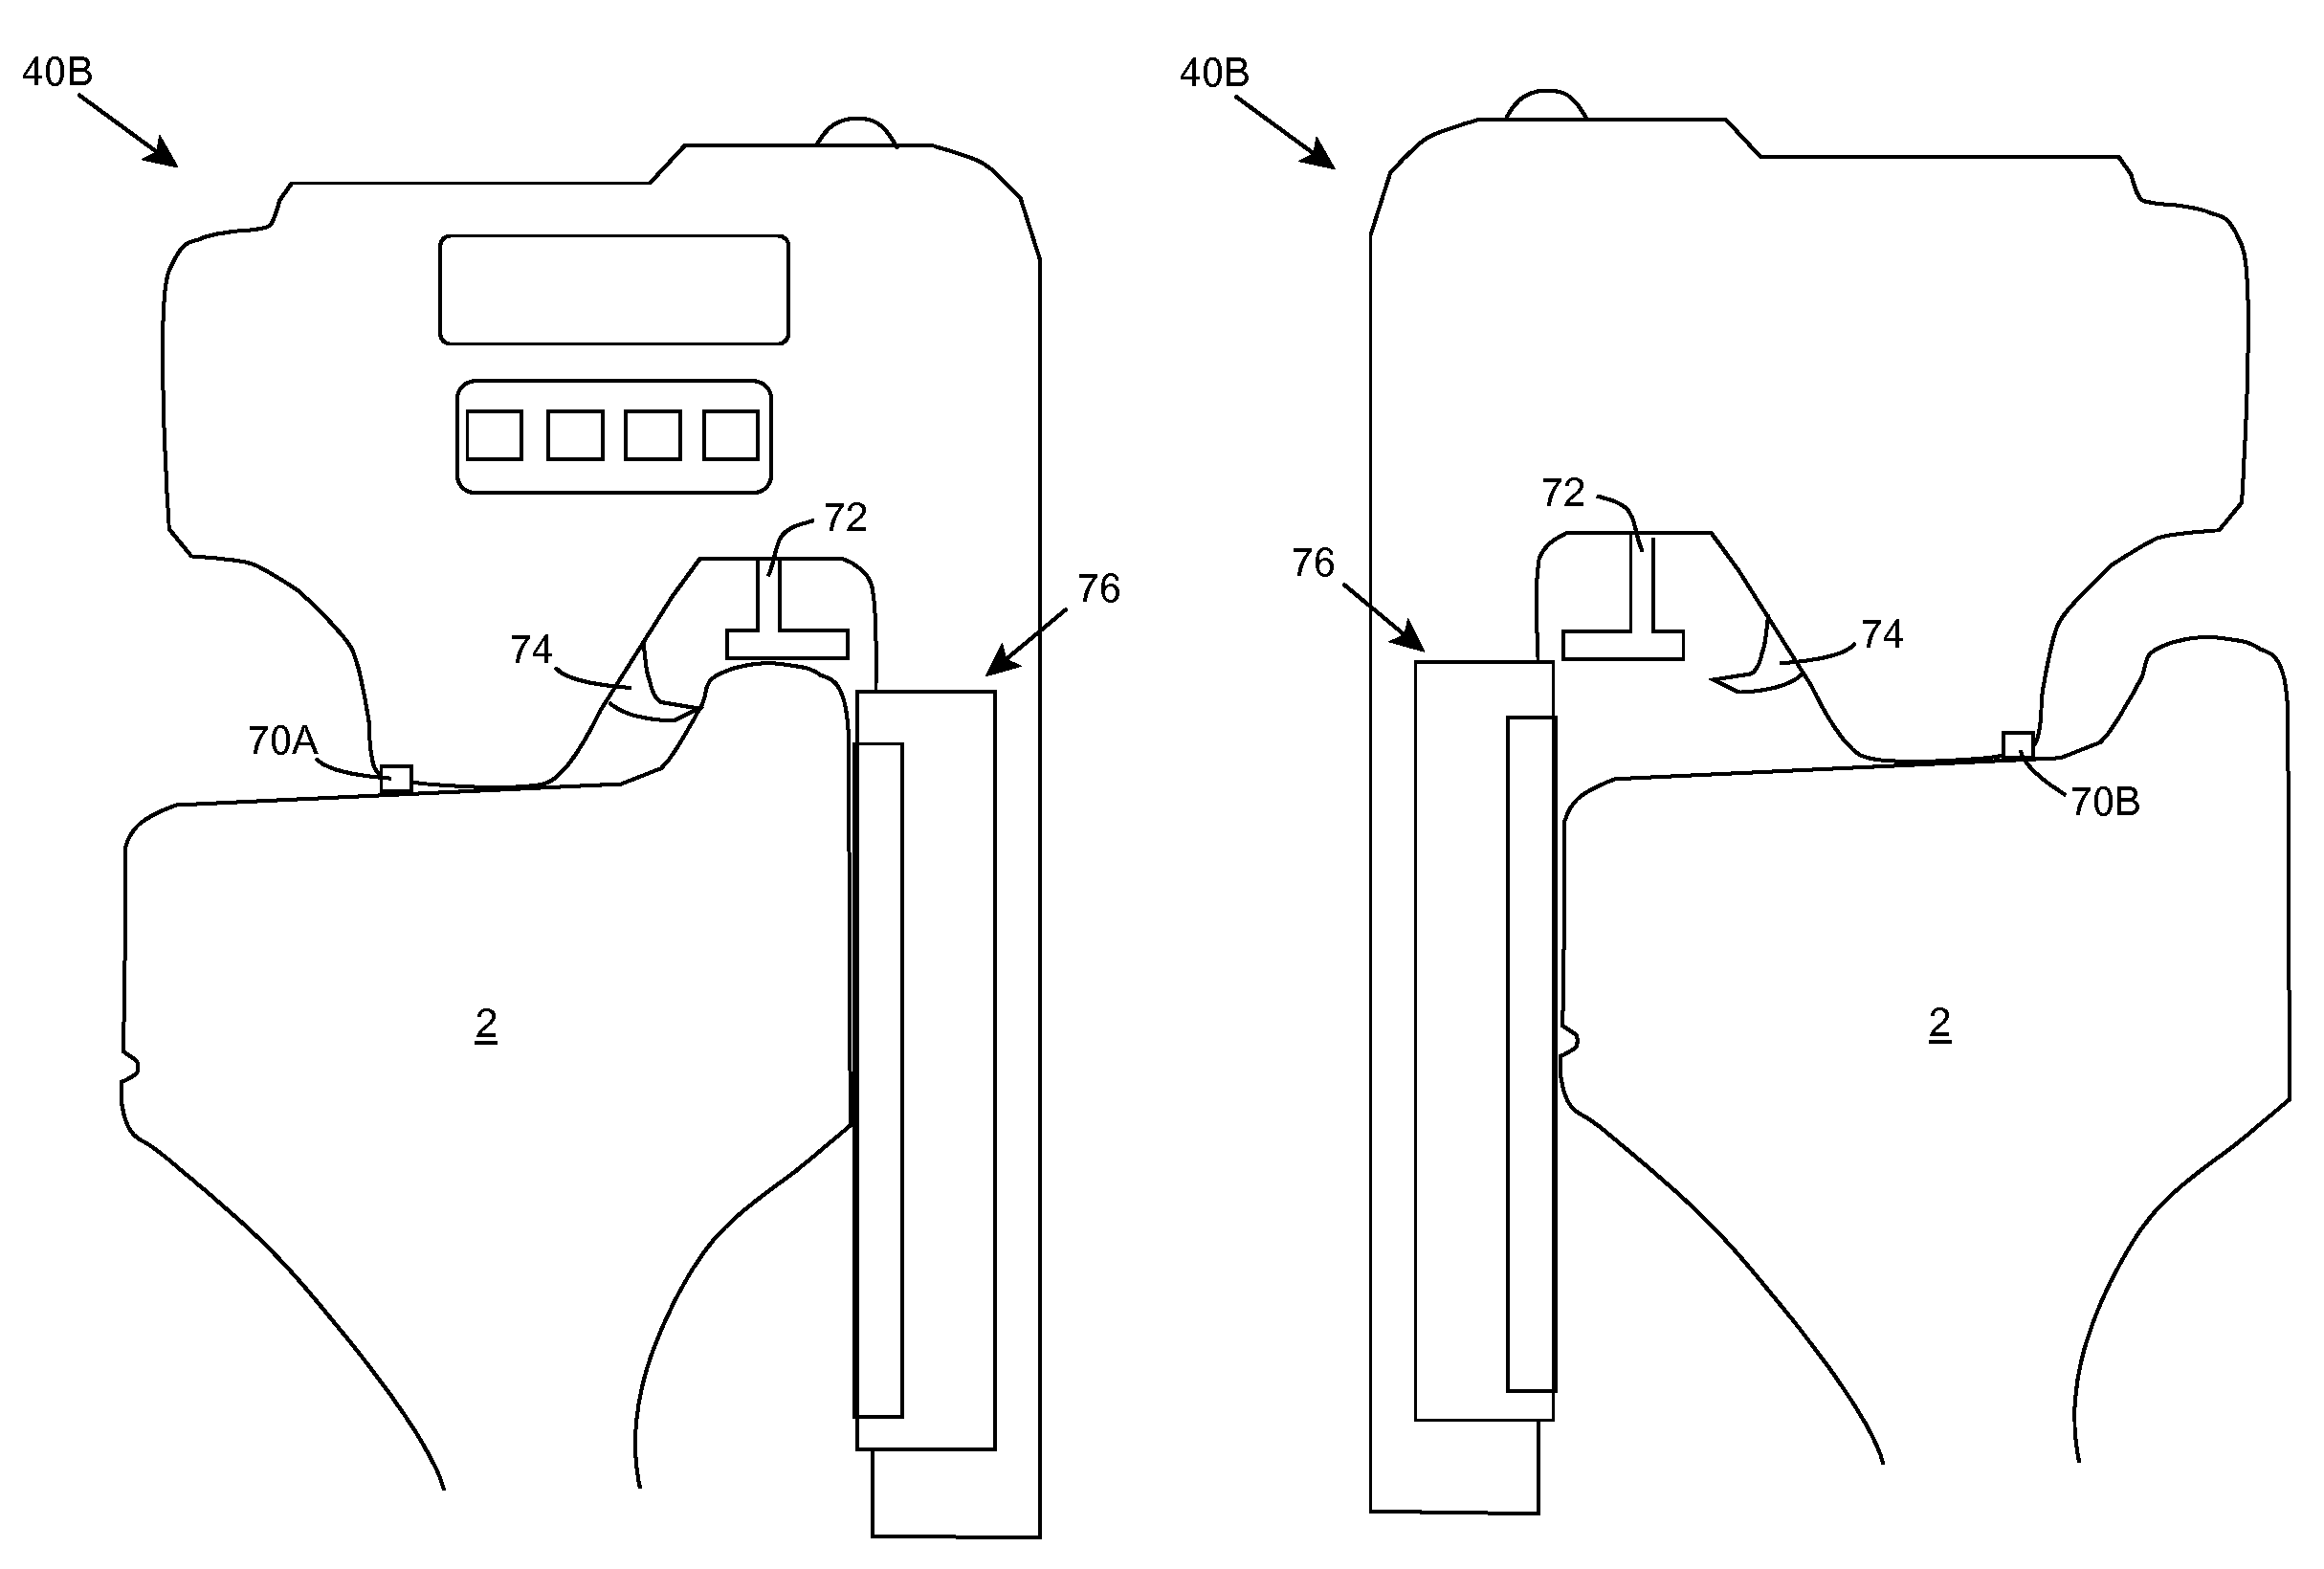 Wheel measurement systems and methods